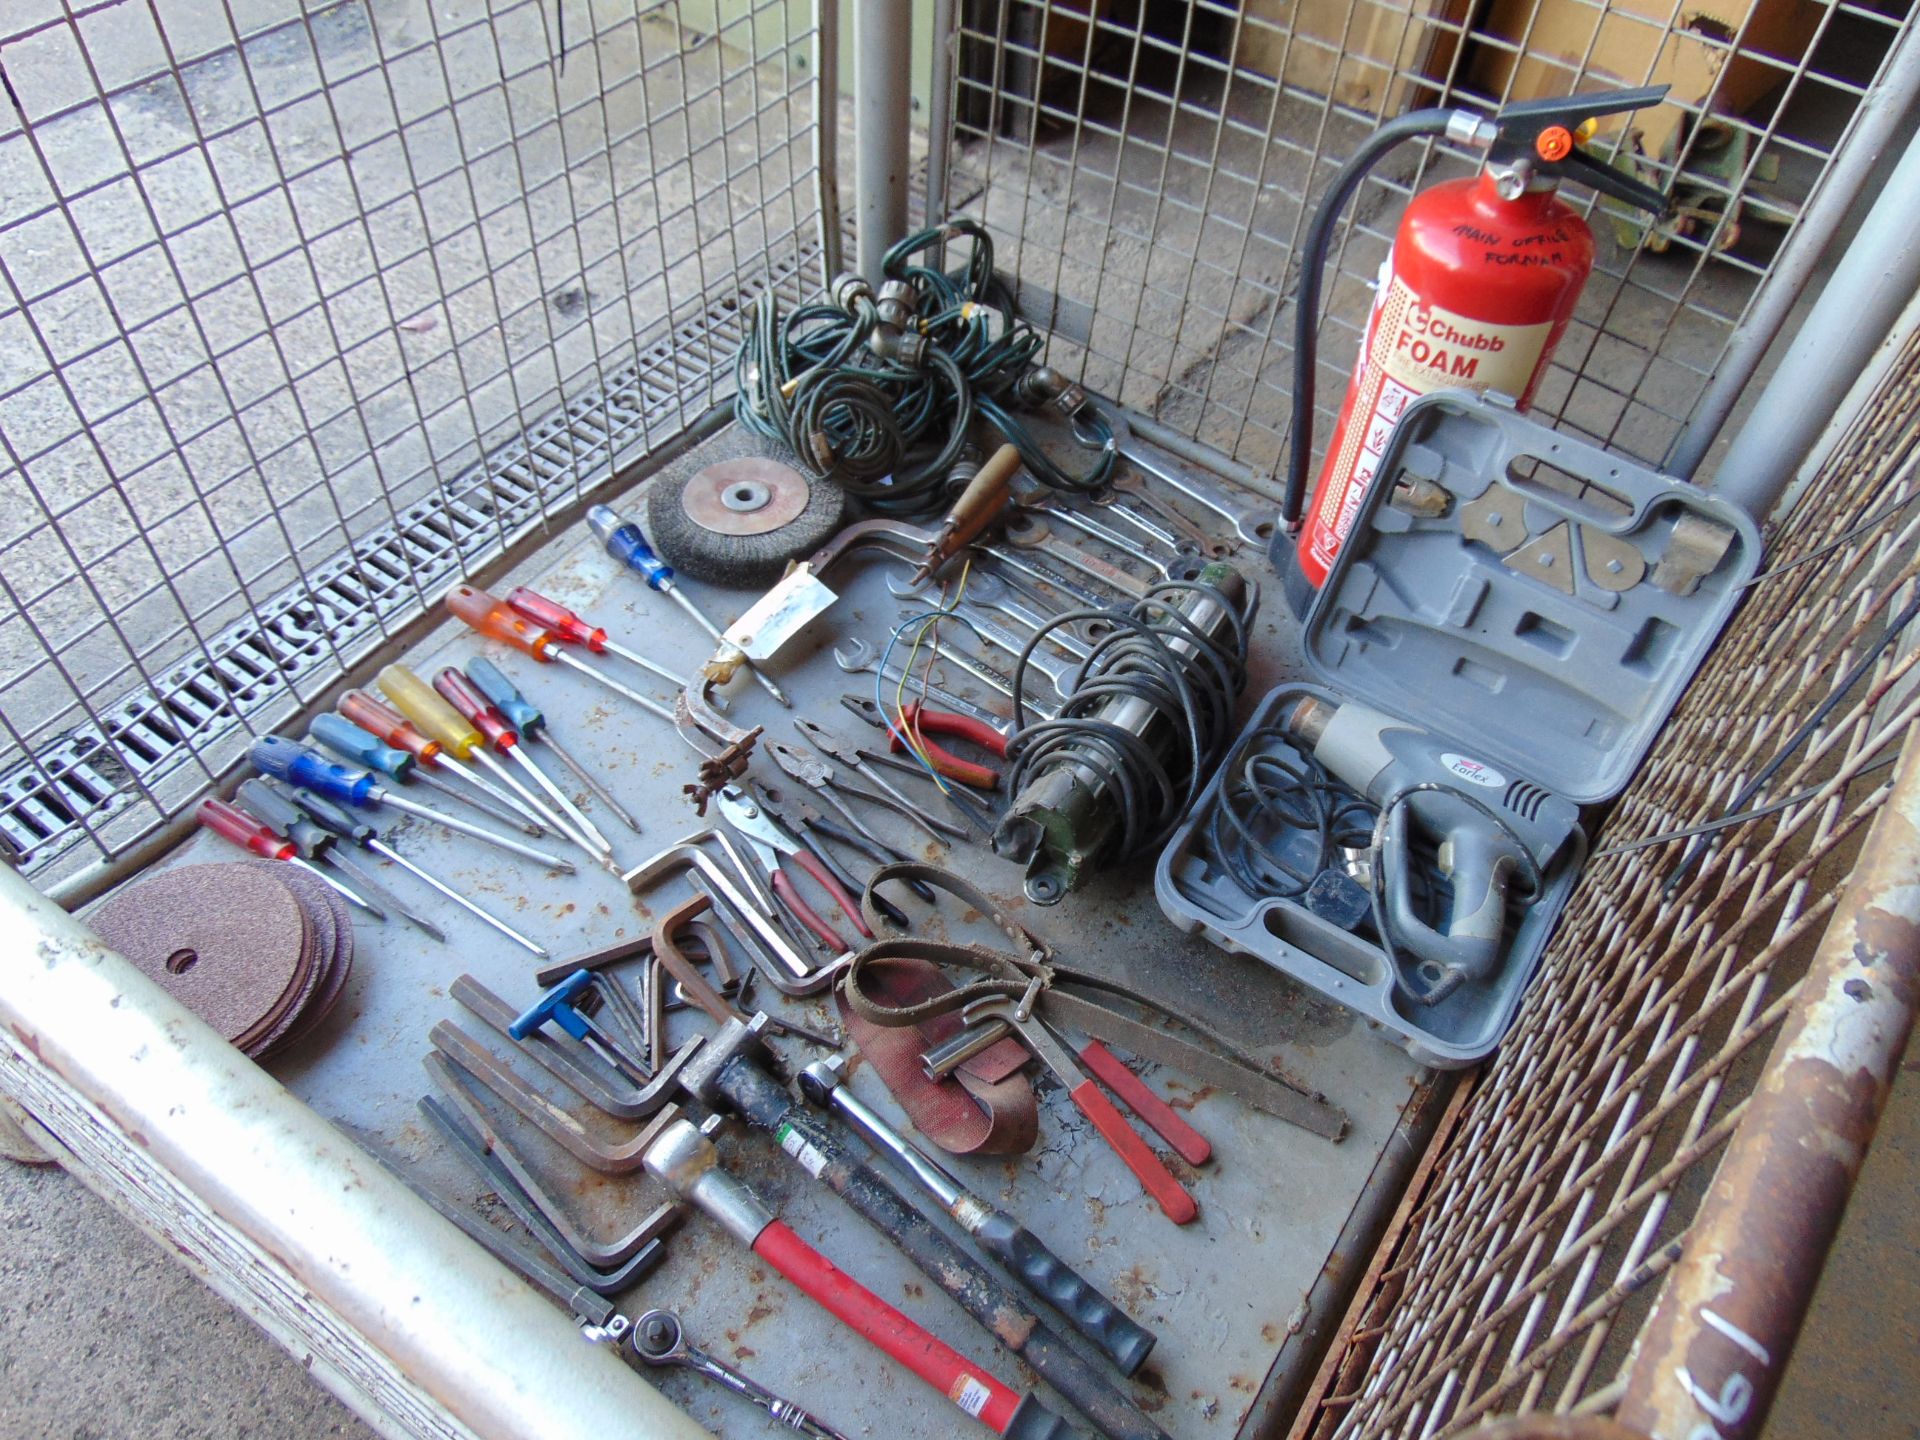 1 x Stillage of Workshop Tools, Spanners, Lights, Torque Wrenches etc - Image 3 of 8